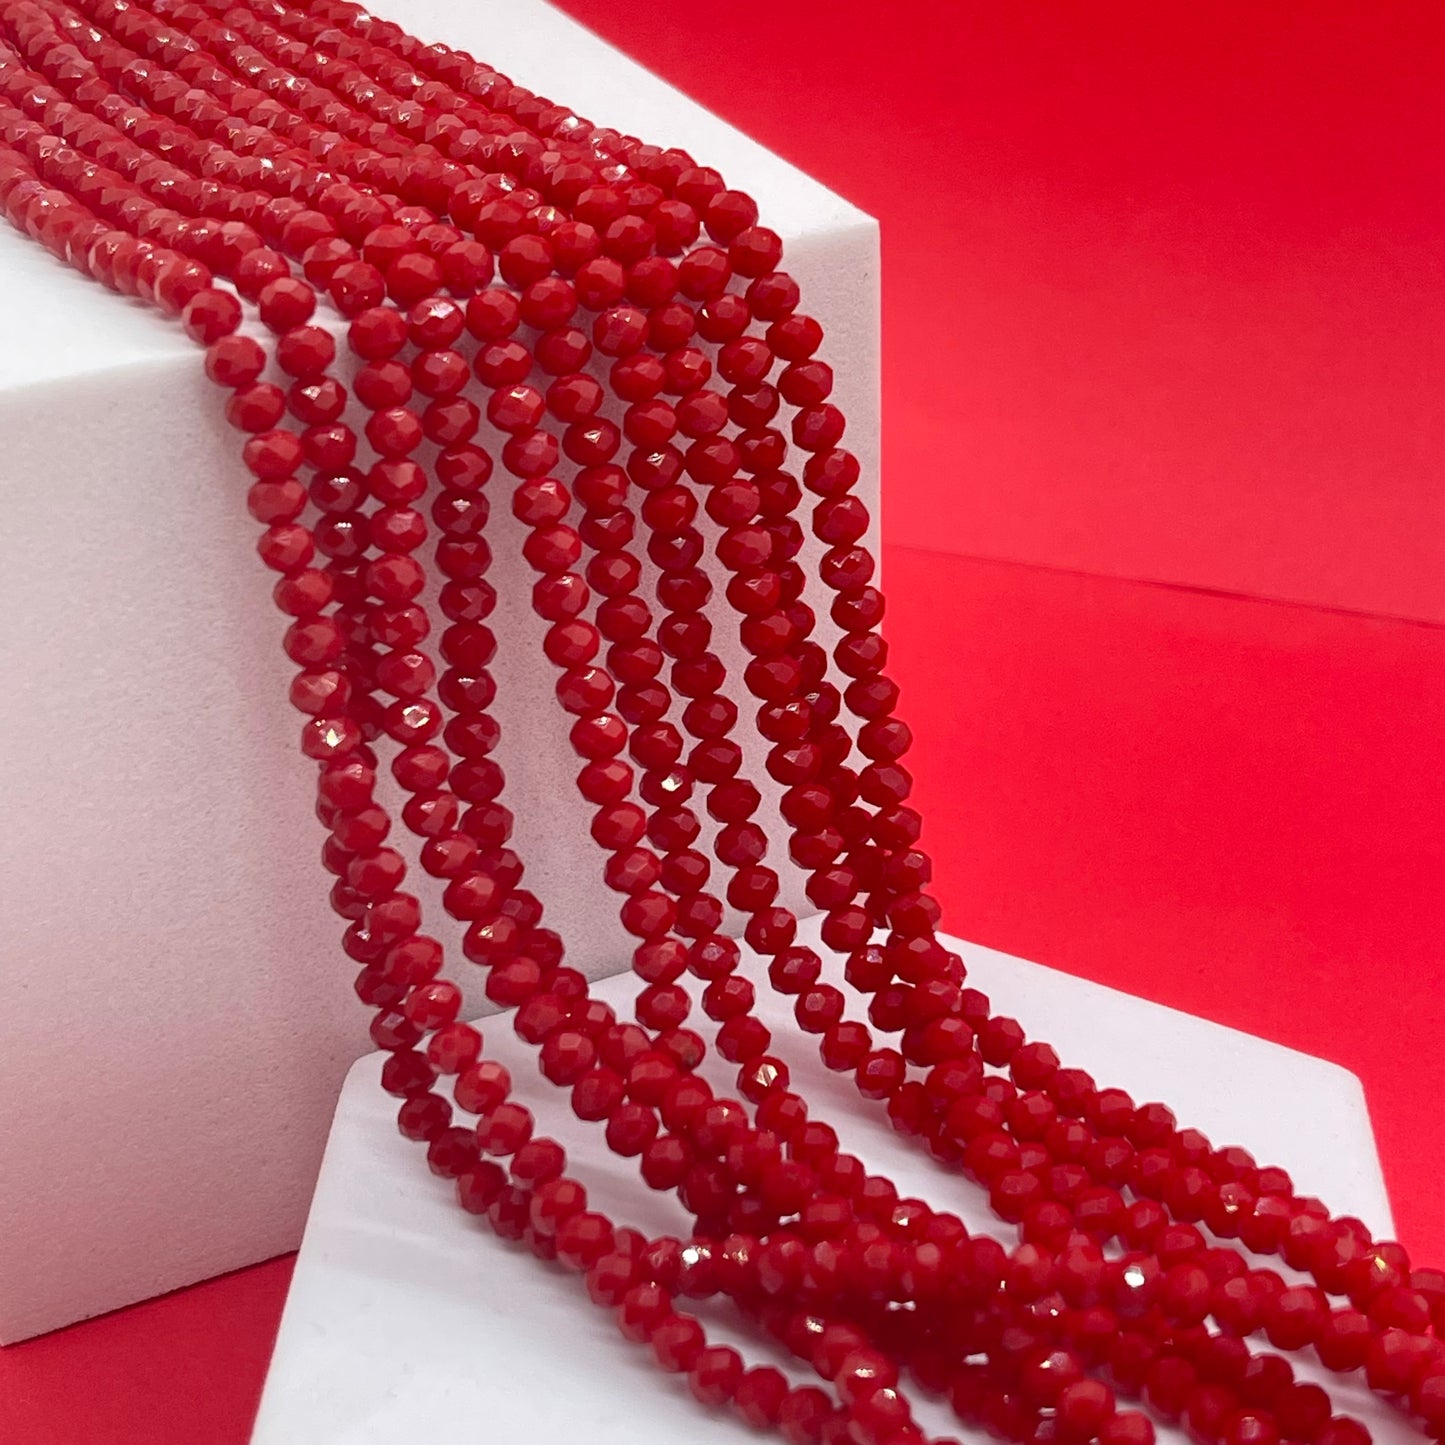 Material: cristal  Dimension: 4mm  Color: rojo oscuro  Quantity: 1 strand   SKU: 103597  The color may be different from the image due to different display devices and image alteration.     This material is durable. To extend its longevity, avoid exposing it to water, lotions, perfumes, or any other chemicals.